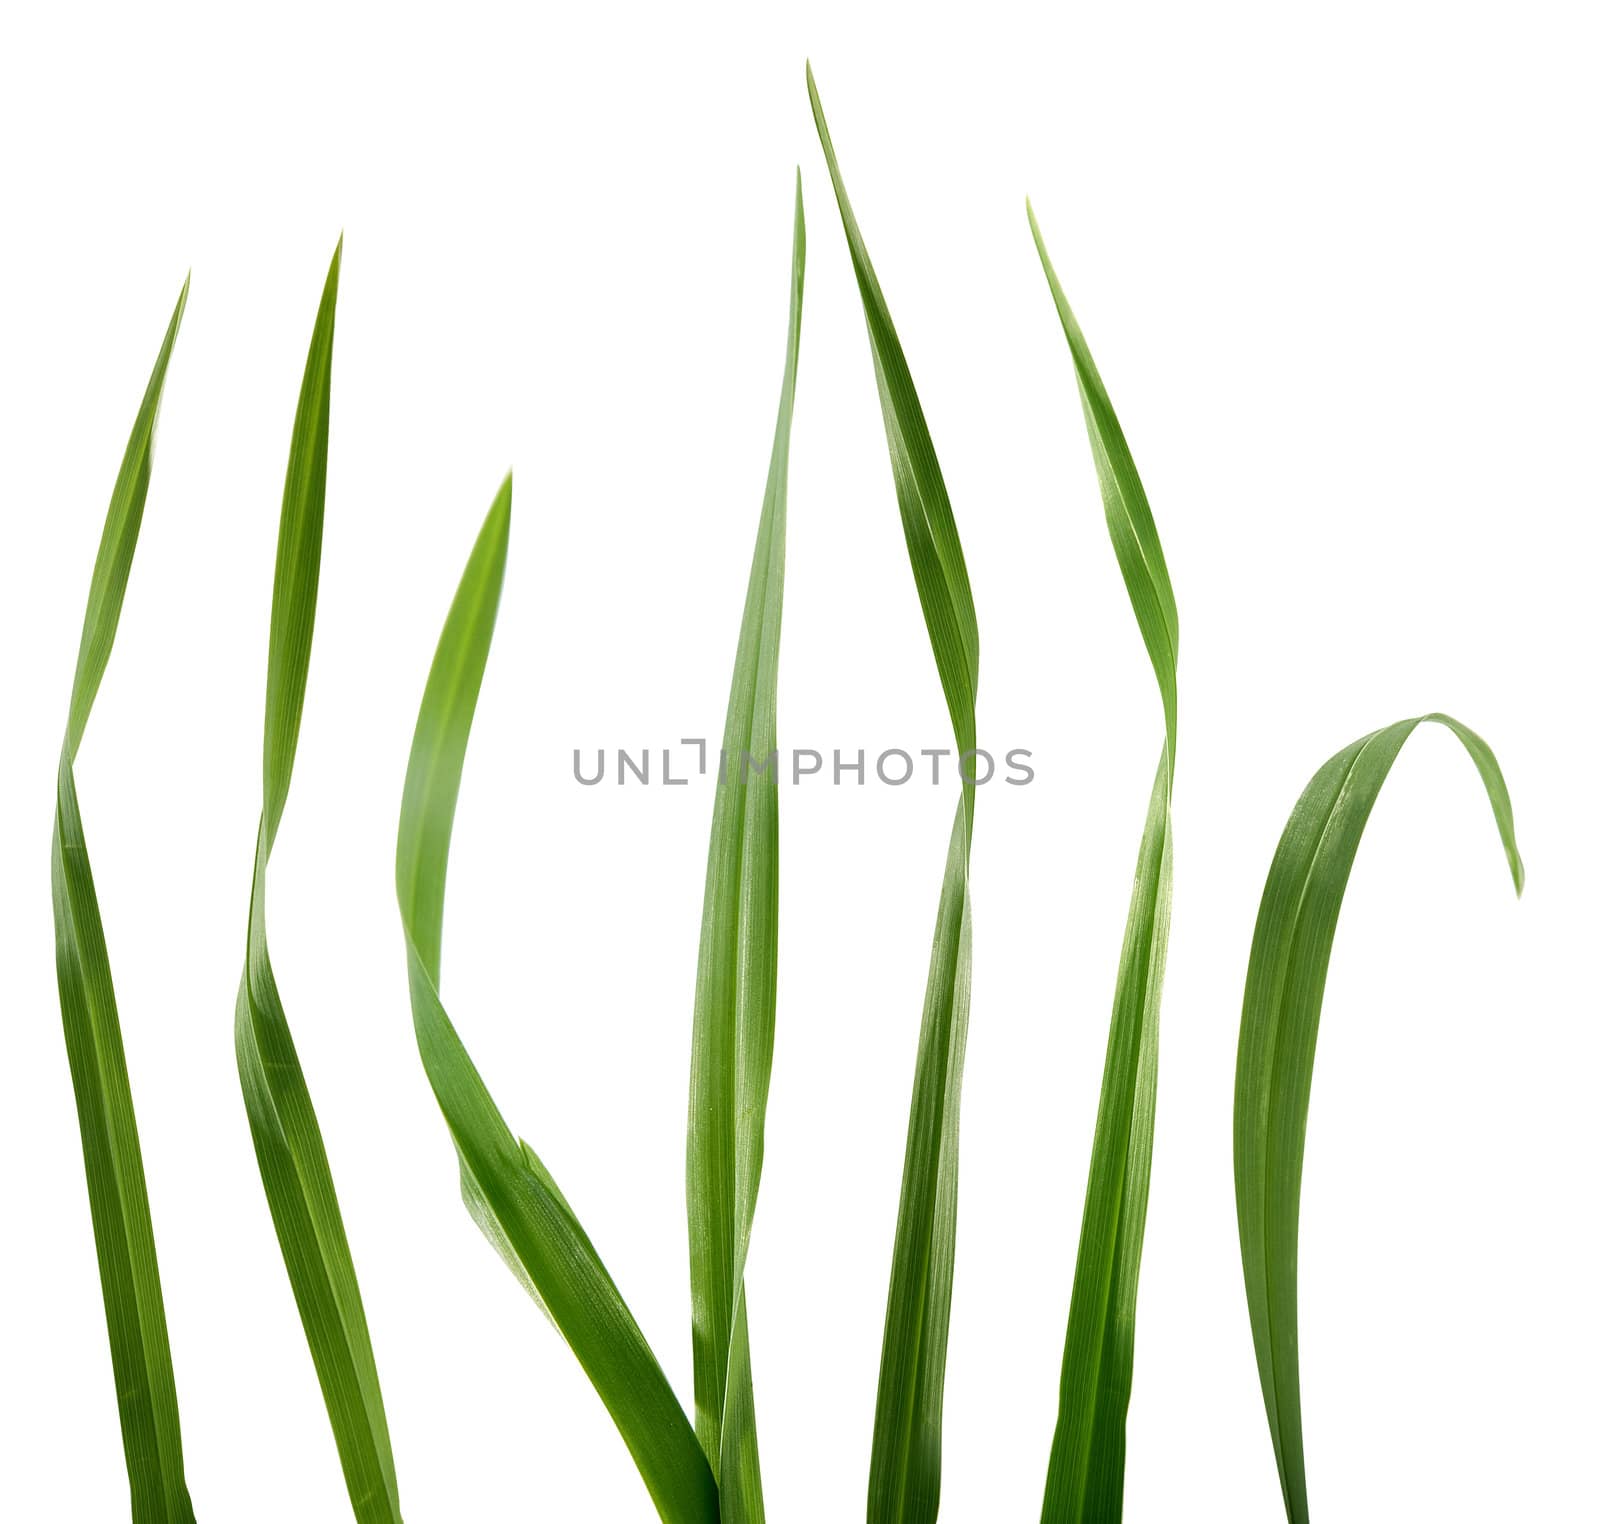 Some isolated green blades of the grass